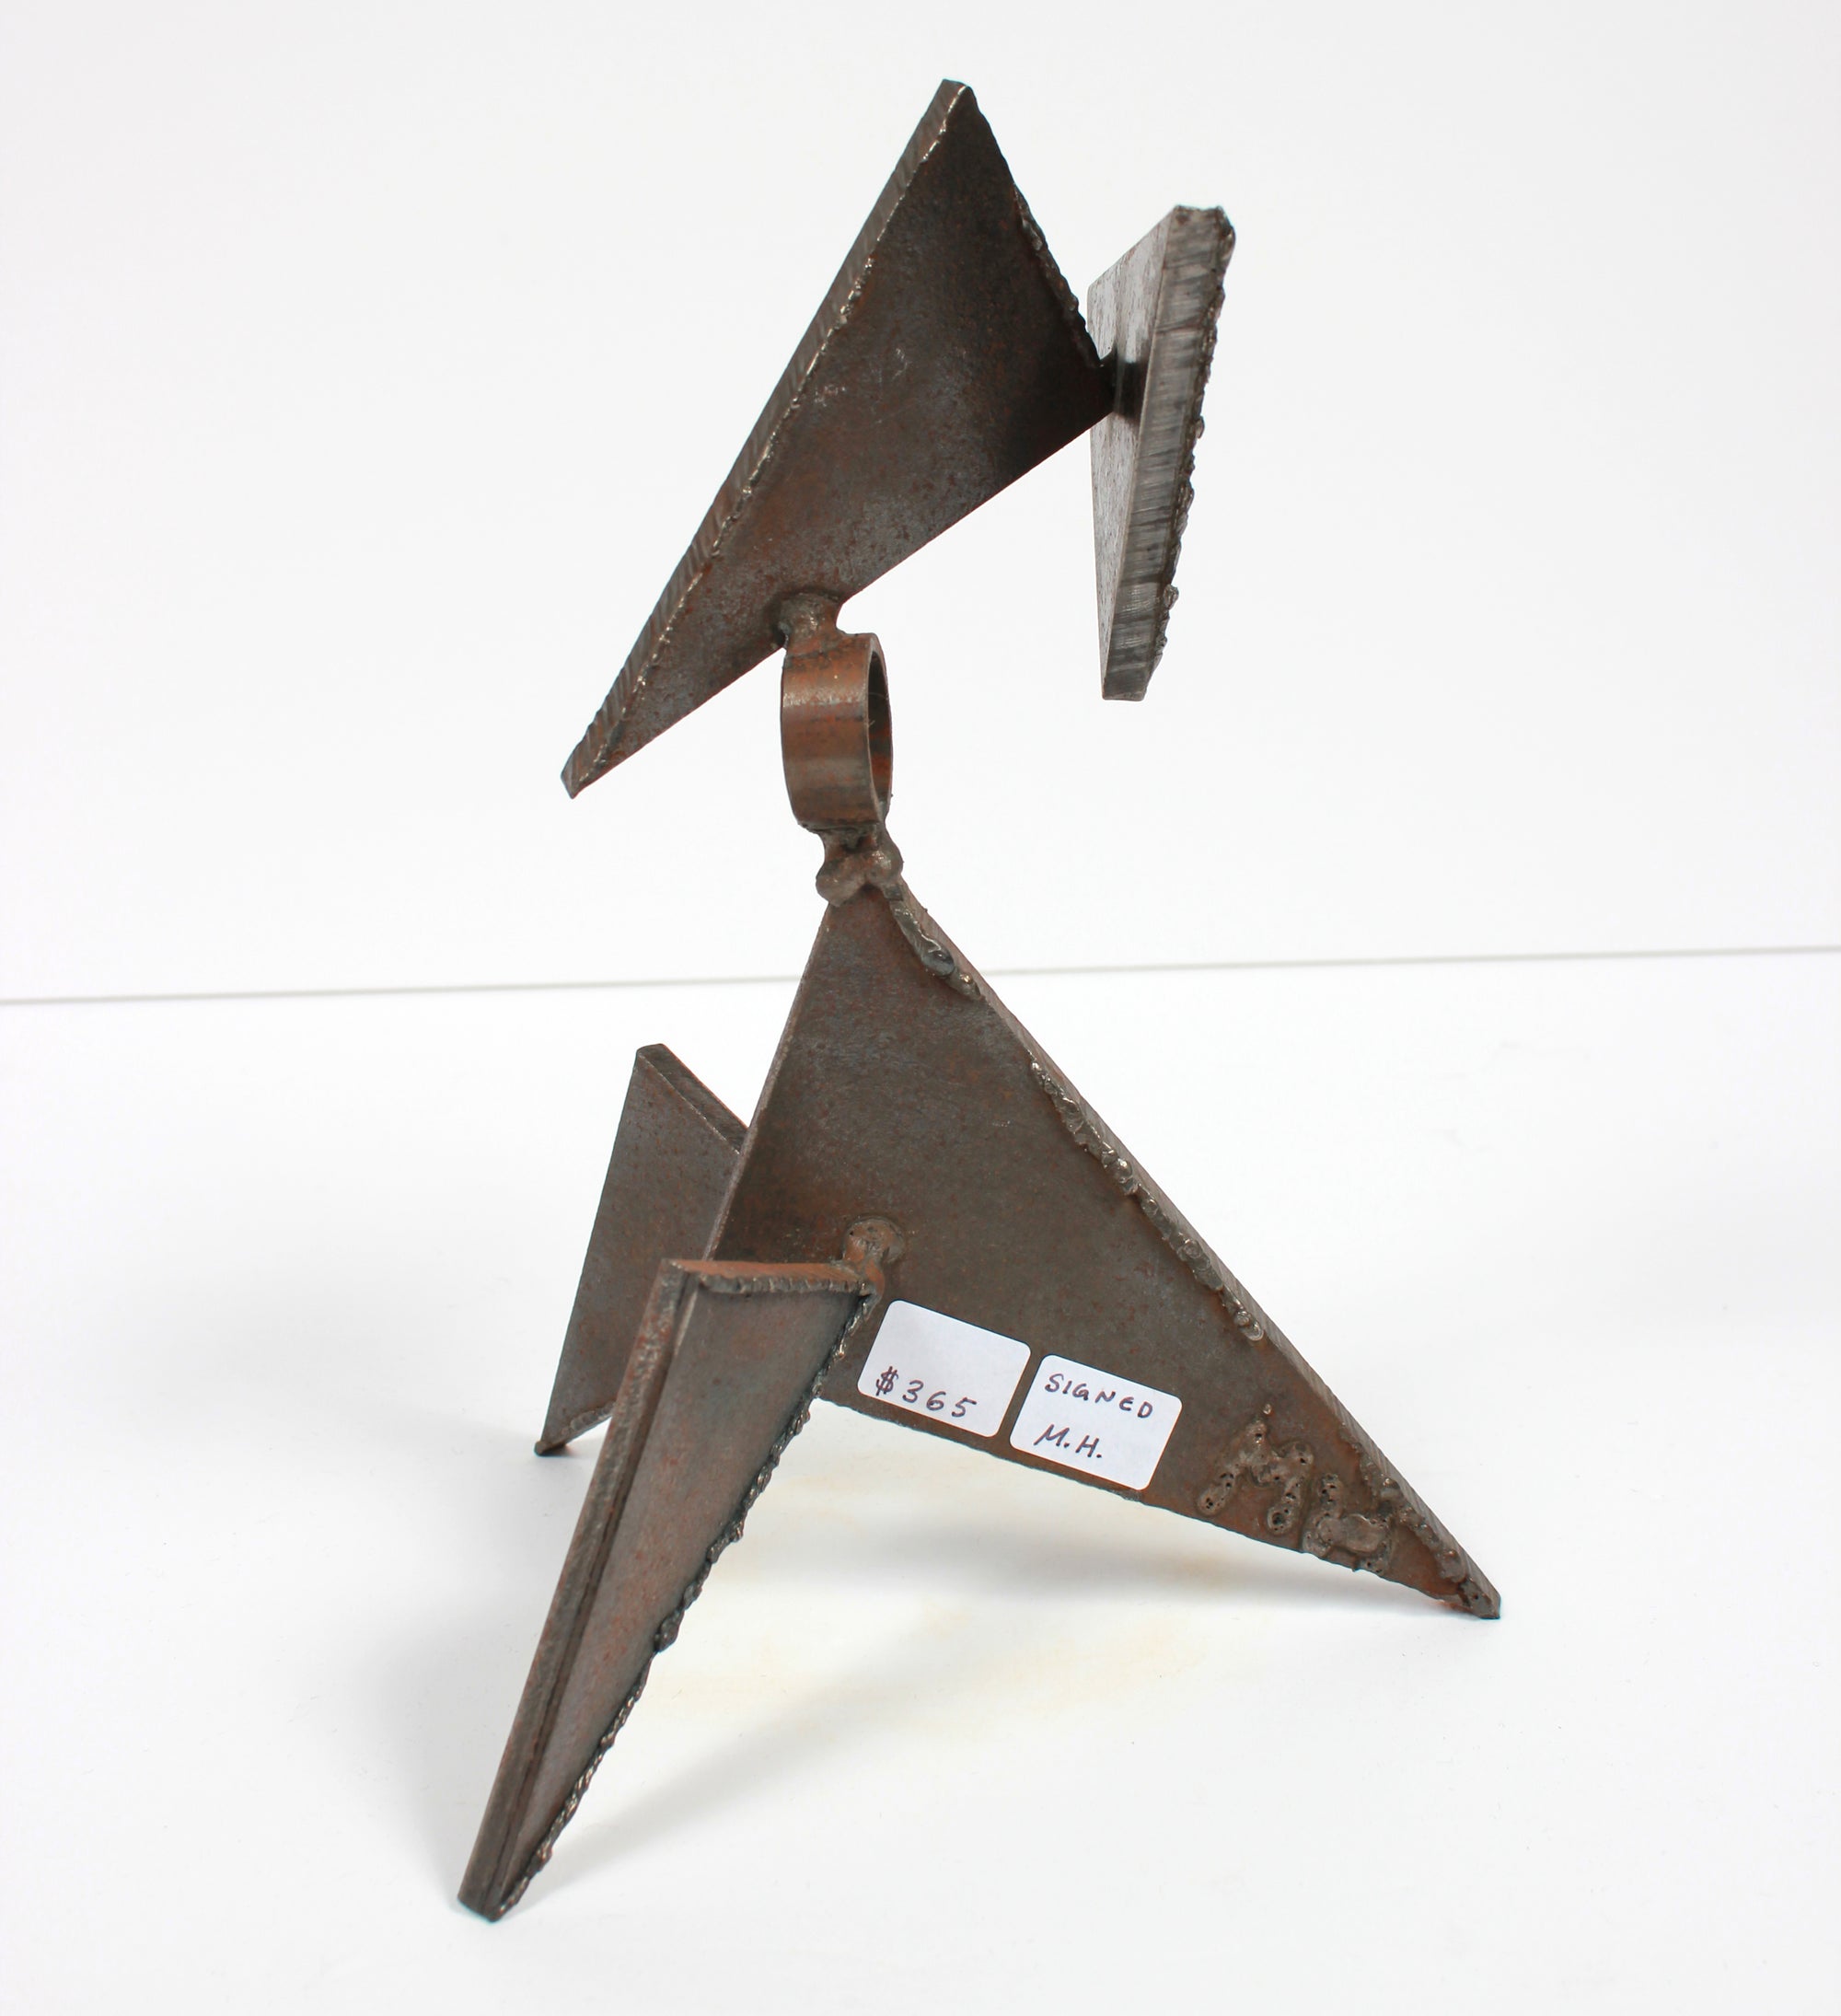 Late 20th Century Abstracted Geometric Welded Steel Sculpture <br><br>#A9280